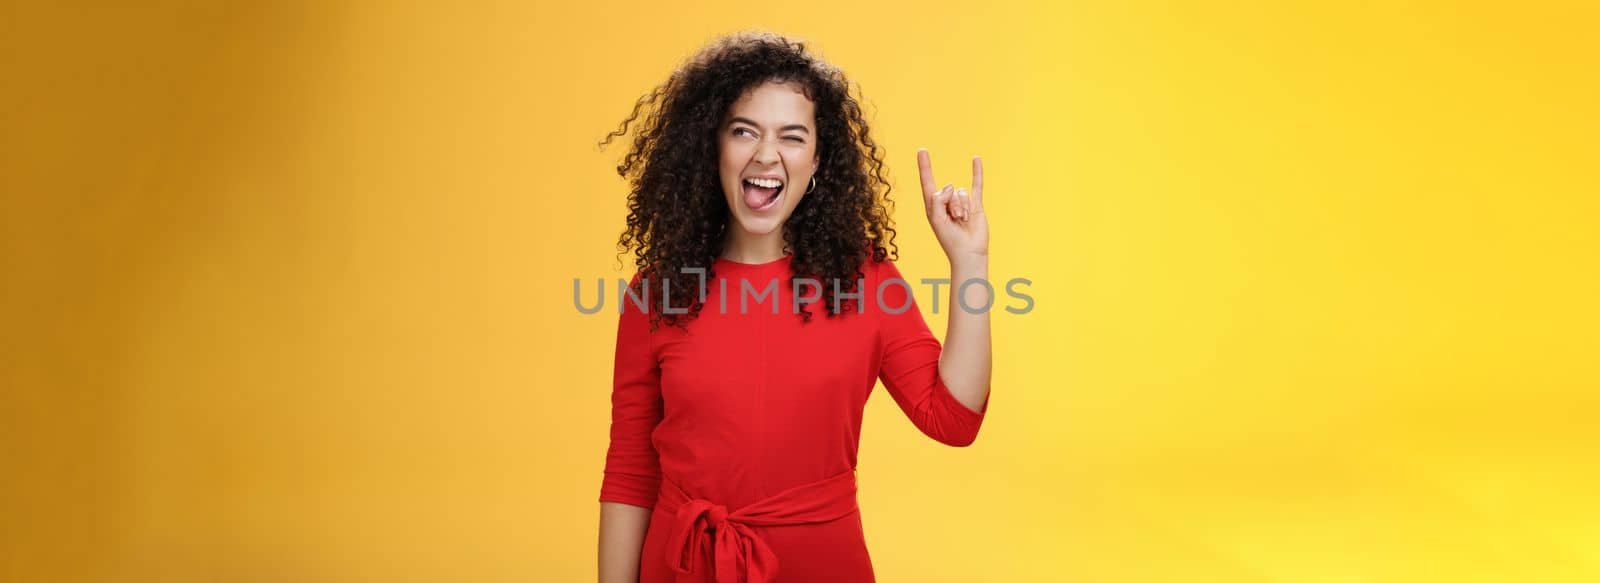 Rebellious meloman leaving in tender girl. Thrilled and carefree curly-haired woman in red dress sticking out tongue and looking right with smile as showing rock-n-roll gesture, enjoying cool music.